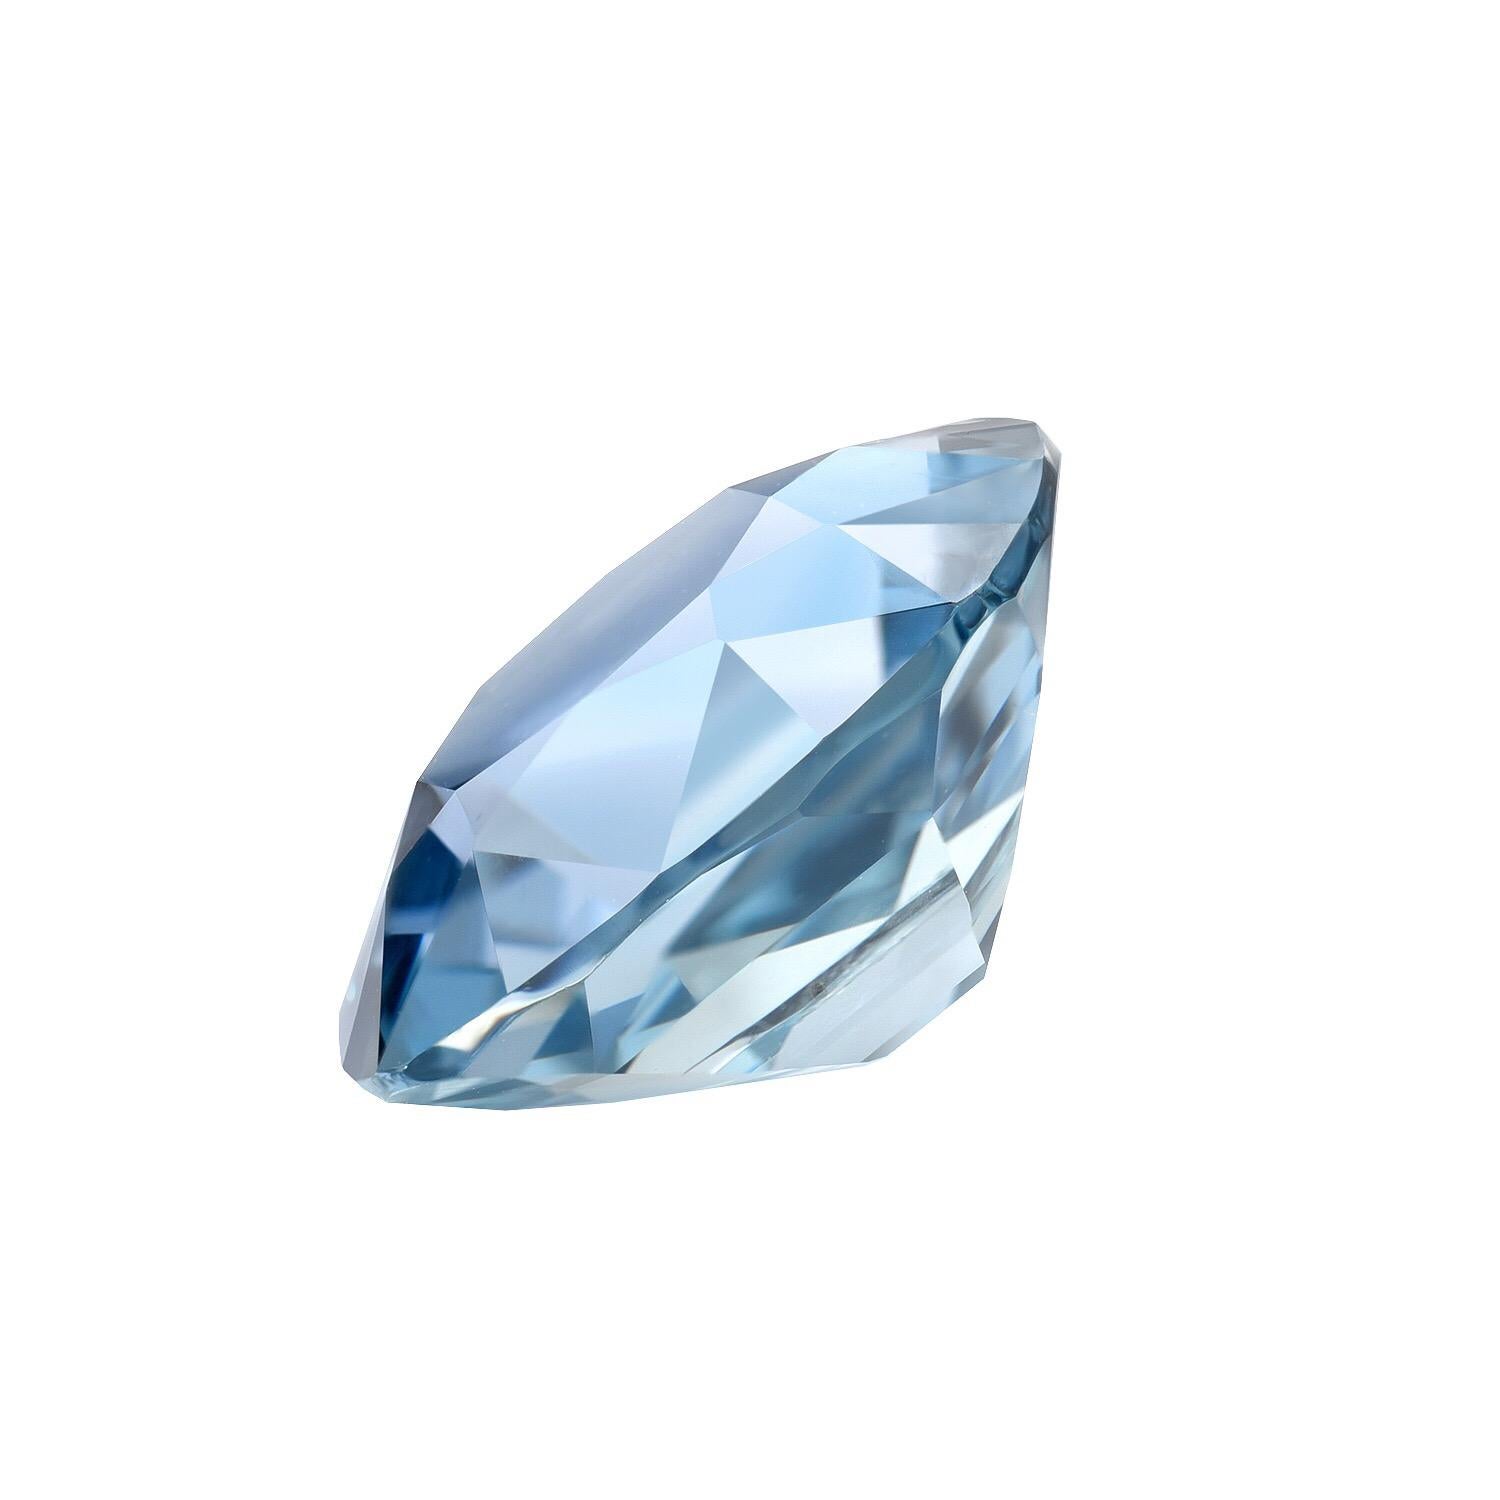 Natural, no heat, Burma Sapphire cushion cut gem, weighing a total of 4.67 carats. 
This collection quality gem, is offered loose and would make an exceptional, unisex, custom made jewelry creation. (Ring, necklace, pendant, bracelet or cuff).
The